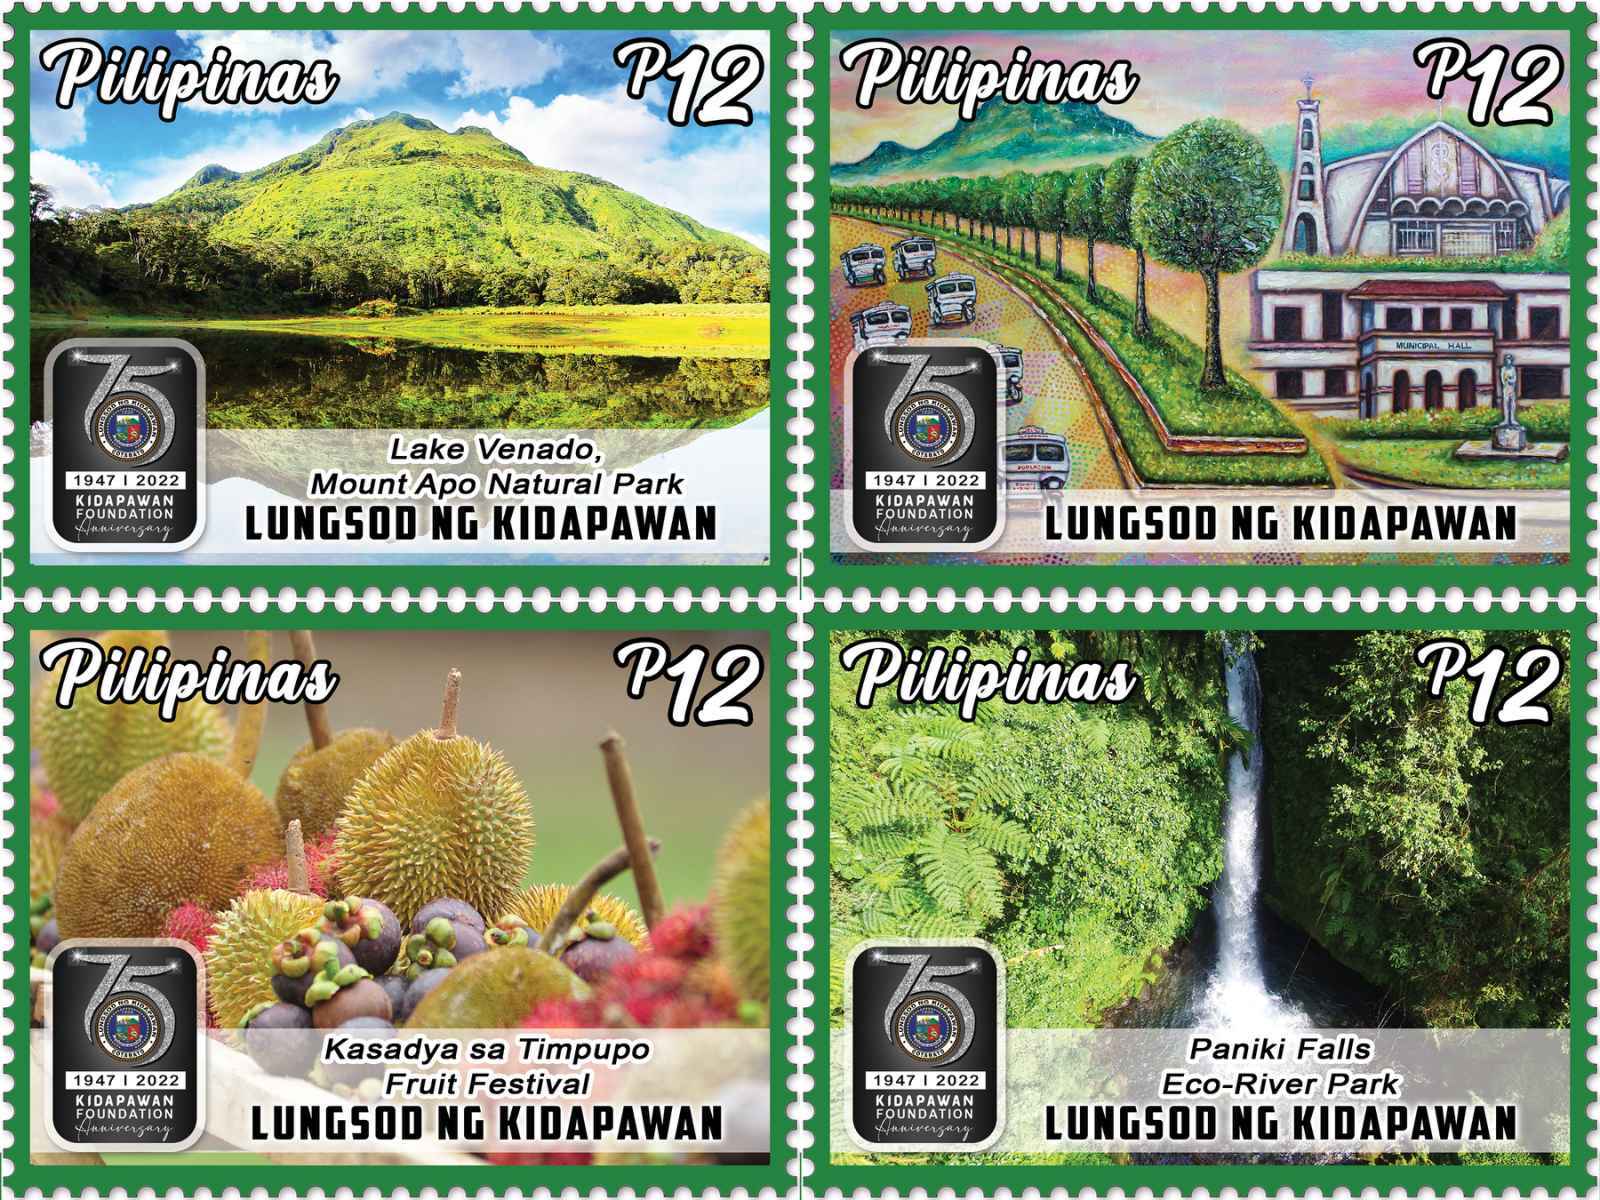 Kidapawan City 75th Anniversary Stamps launched